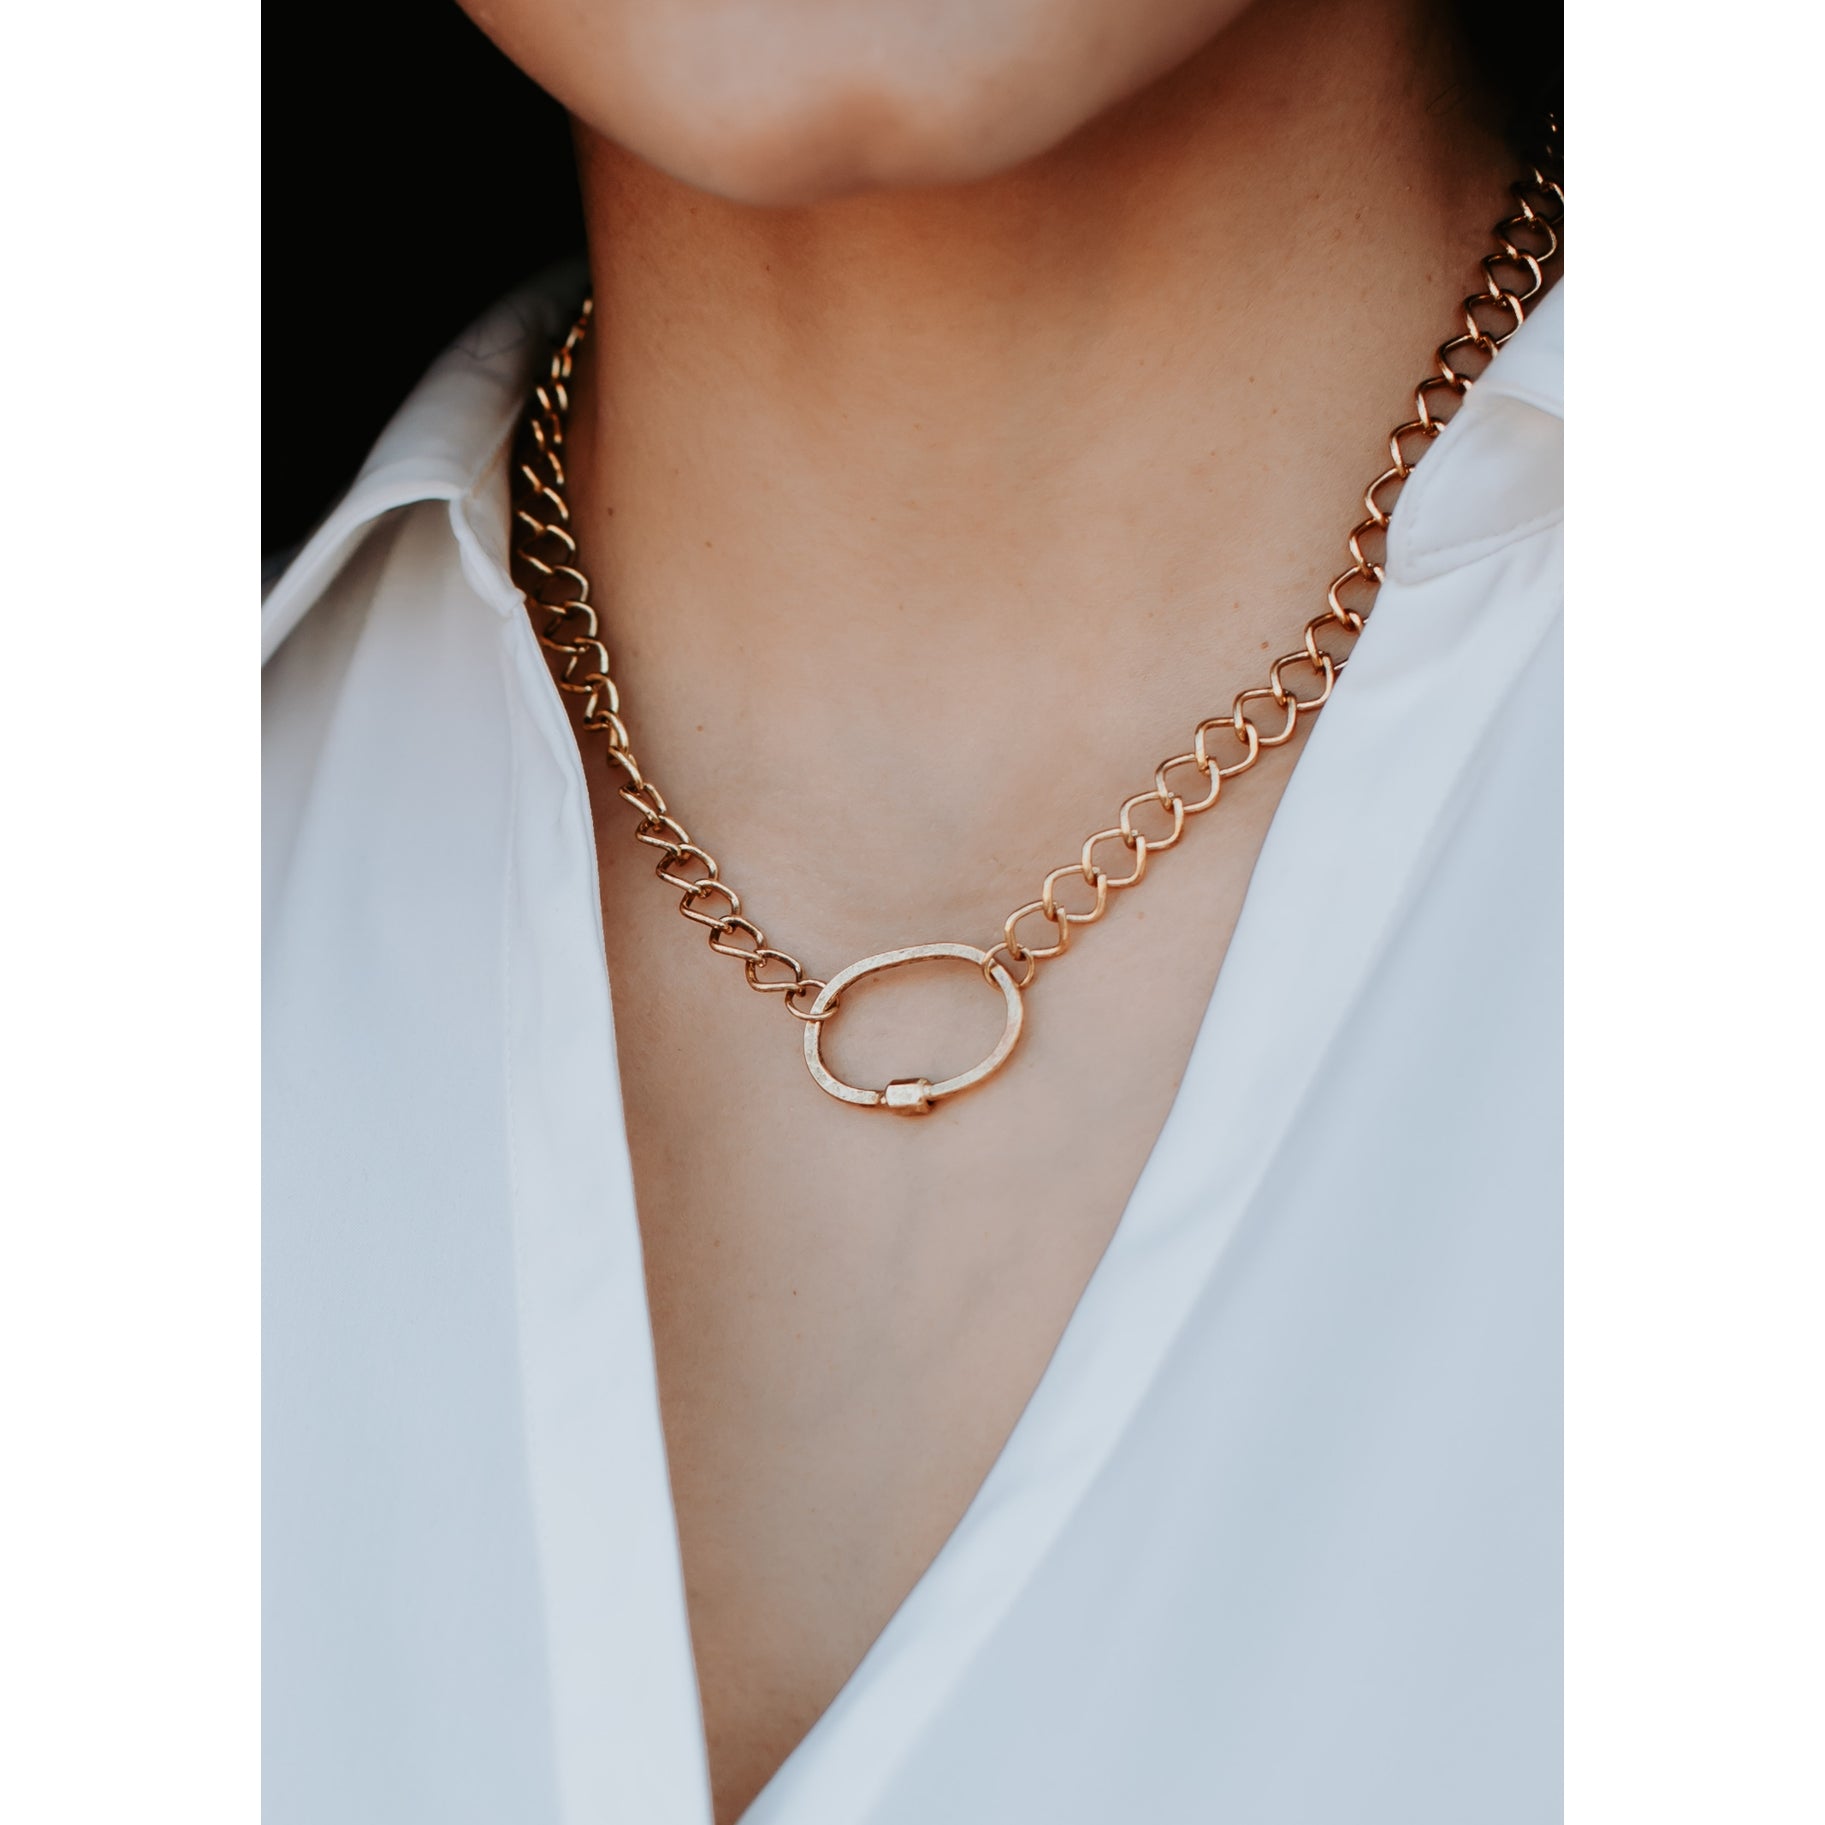 Gold Chain Link Necklace with Oval Pendant